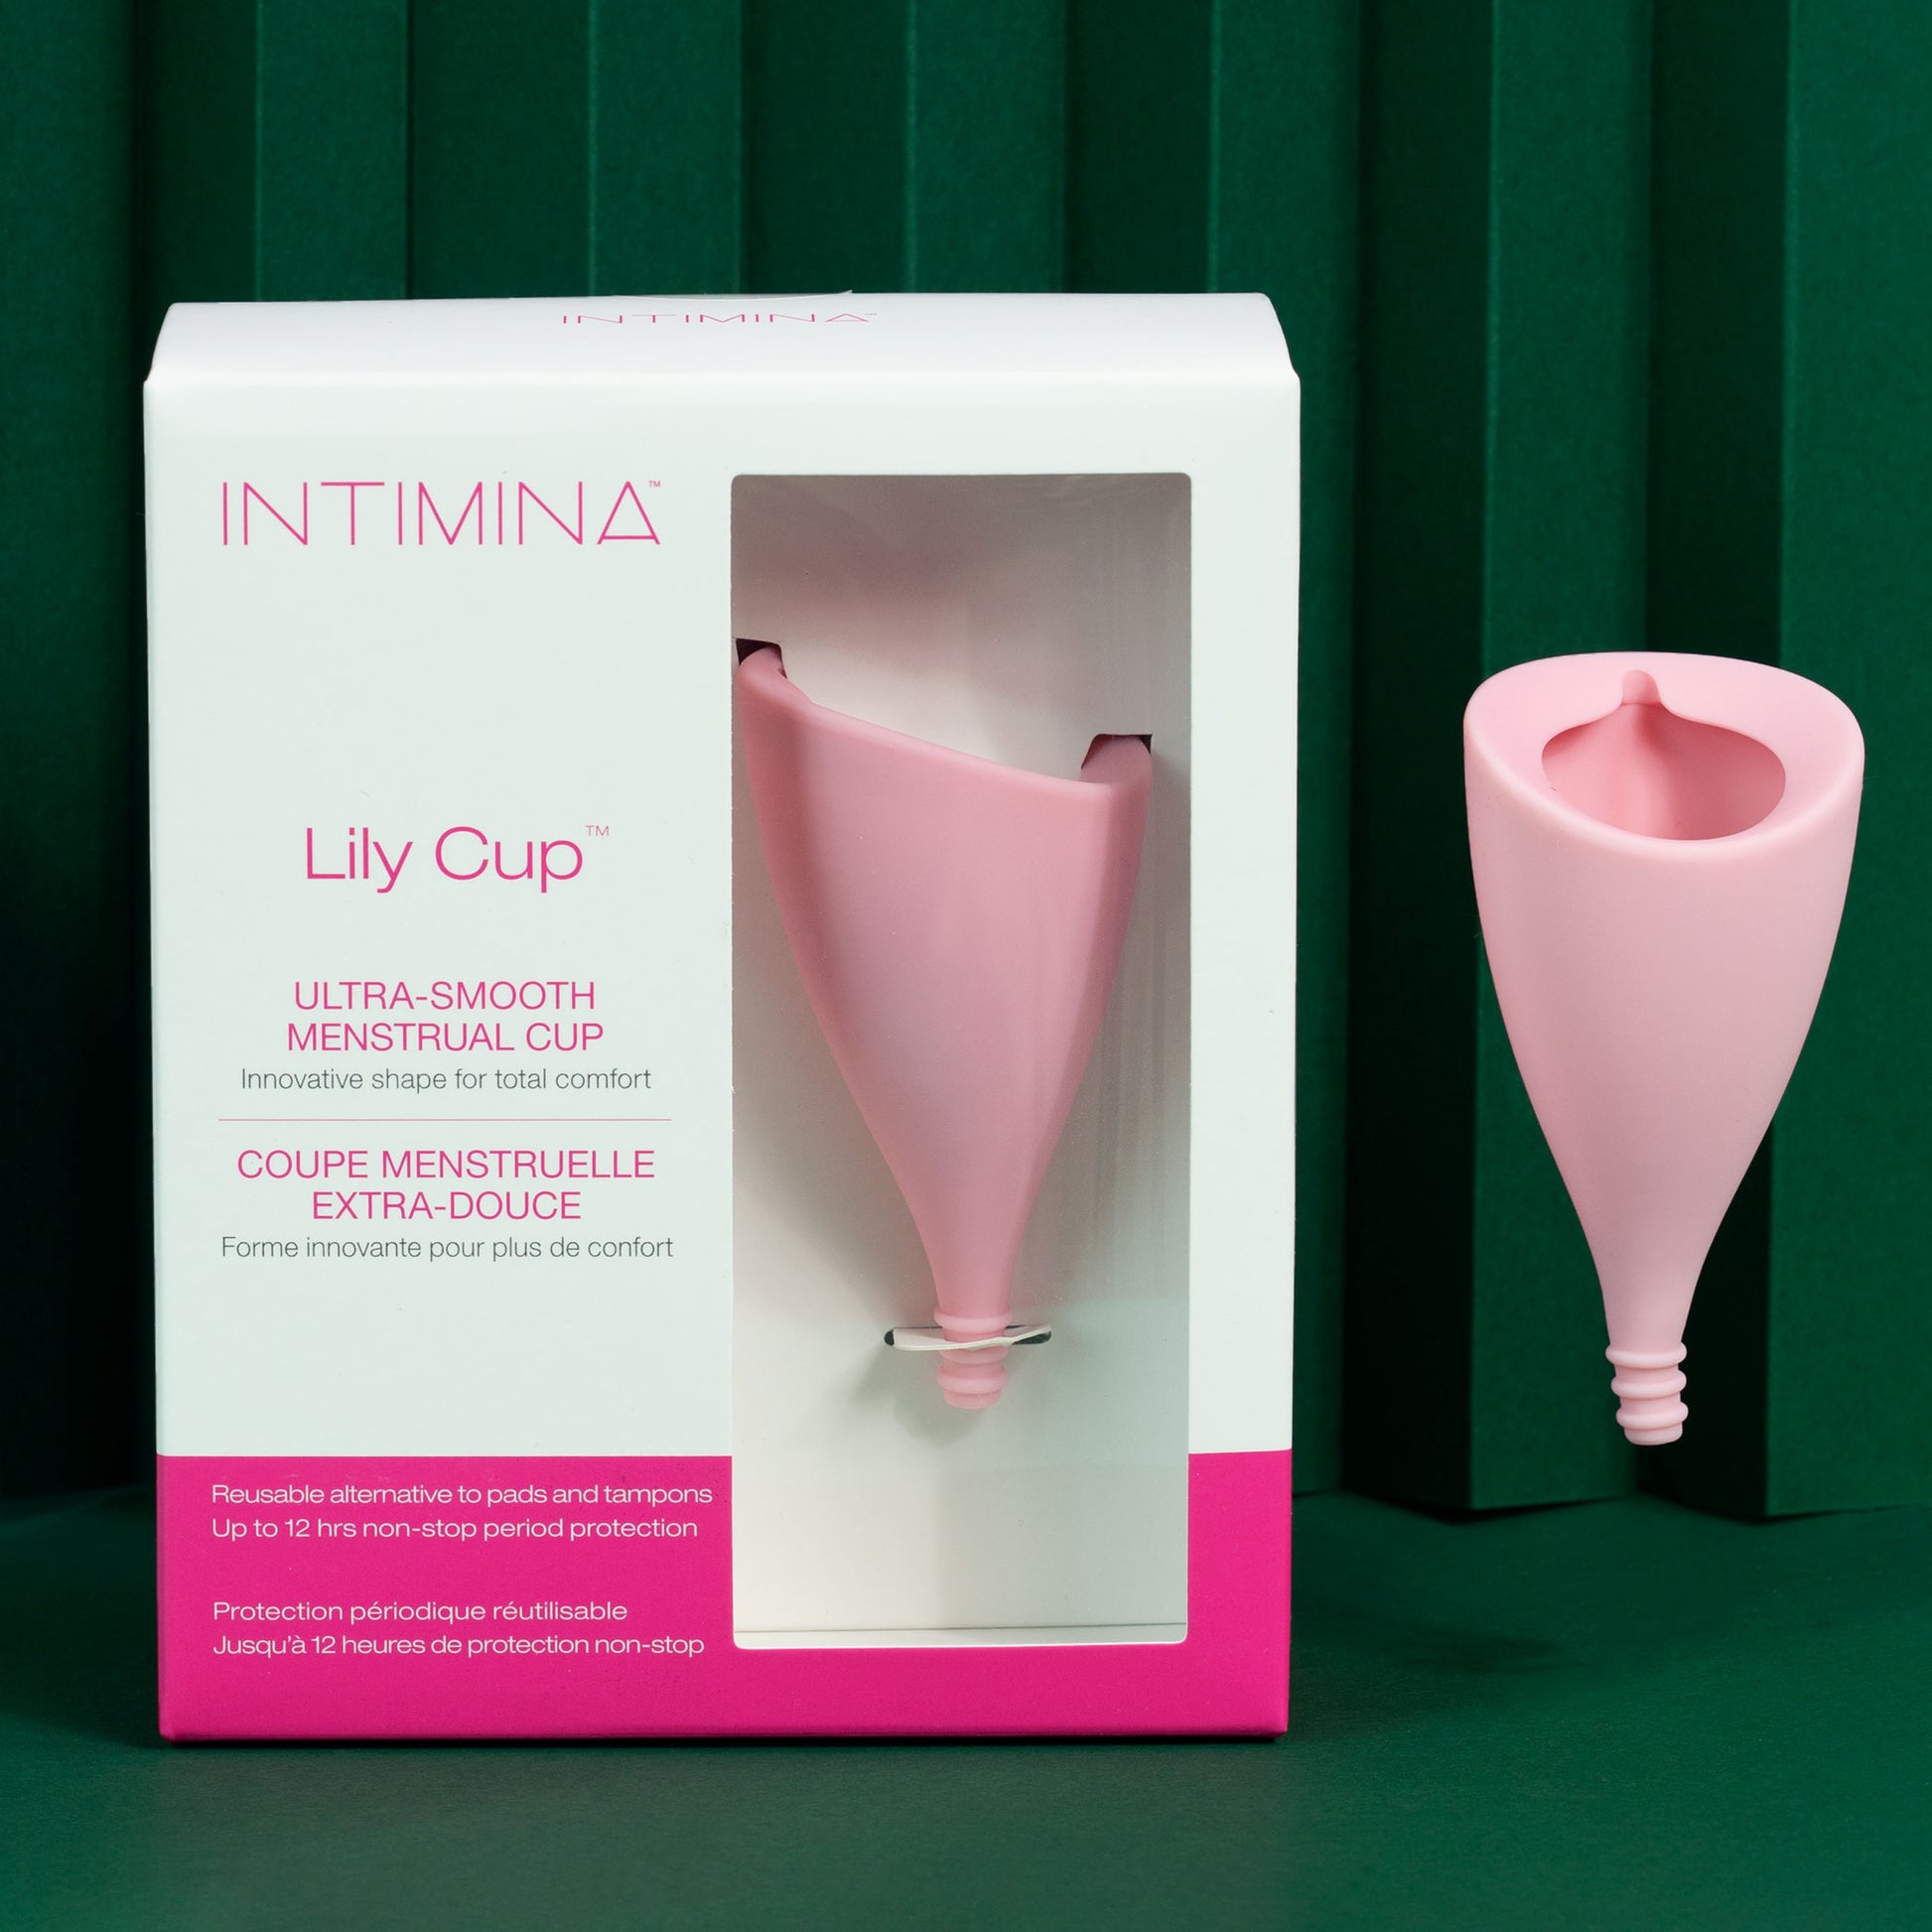 NIXIT - Menstrual Cup - 100% Med Grade Silicone - Sealed box comes